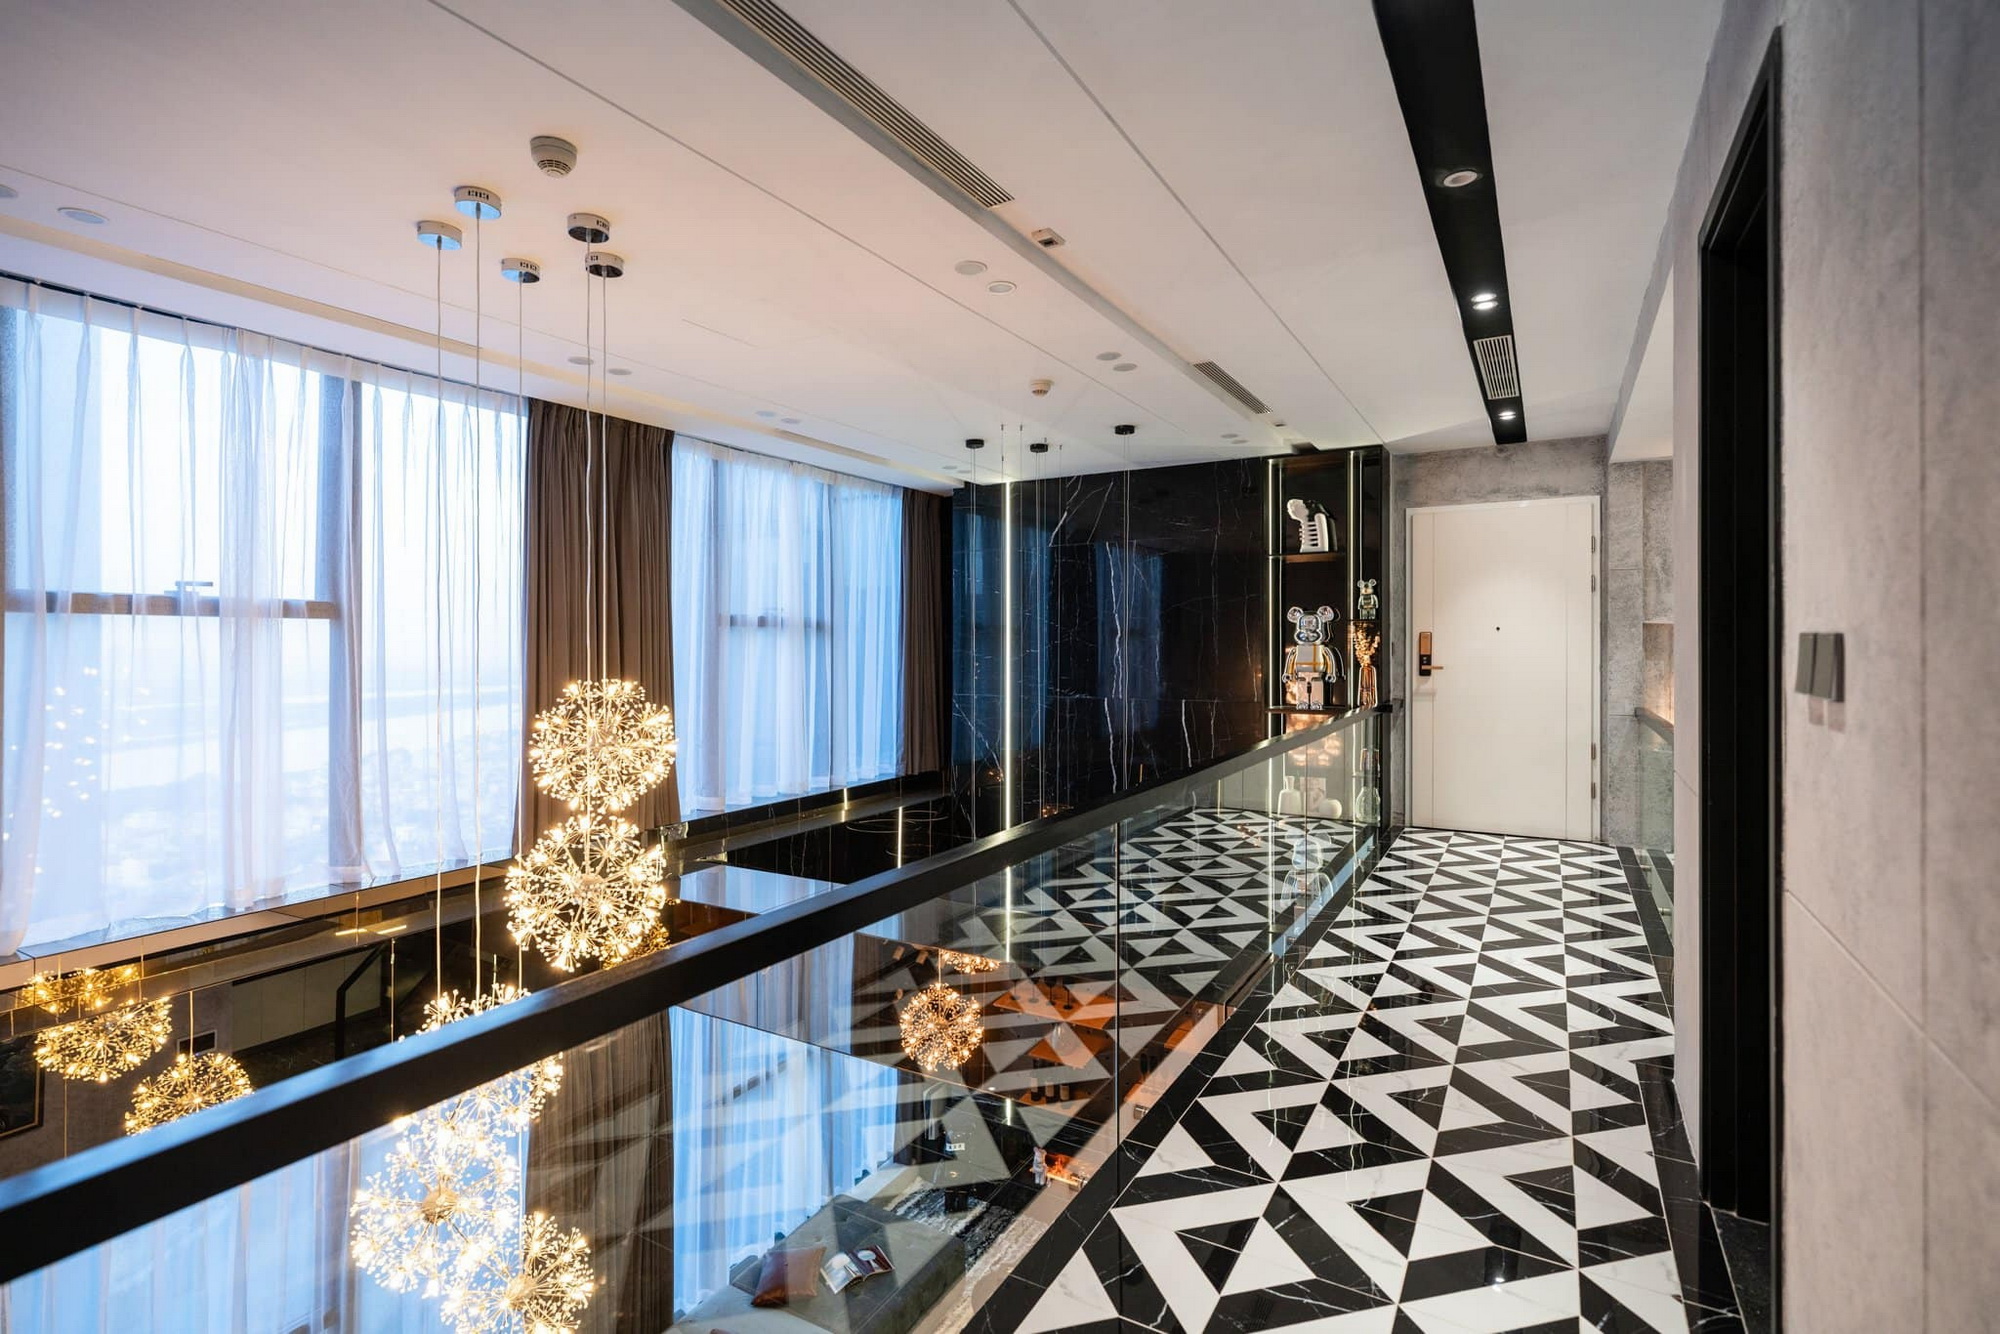 The second-floor corridor is covered with black and white enamel motifs that complement the apartment's overall color scheme while distinguishing it from the first floor. 